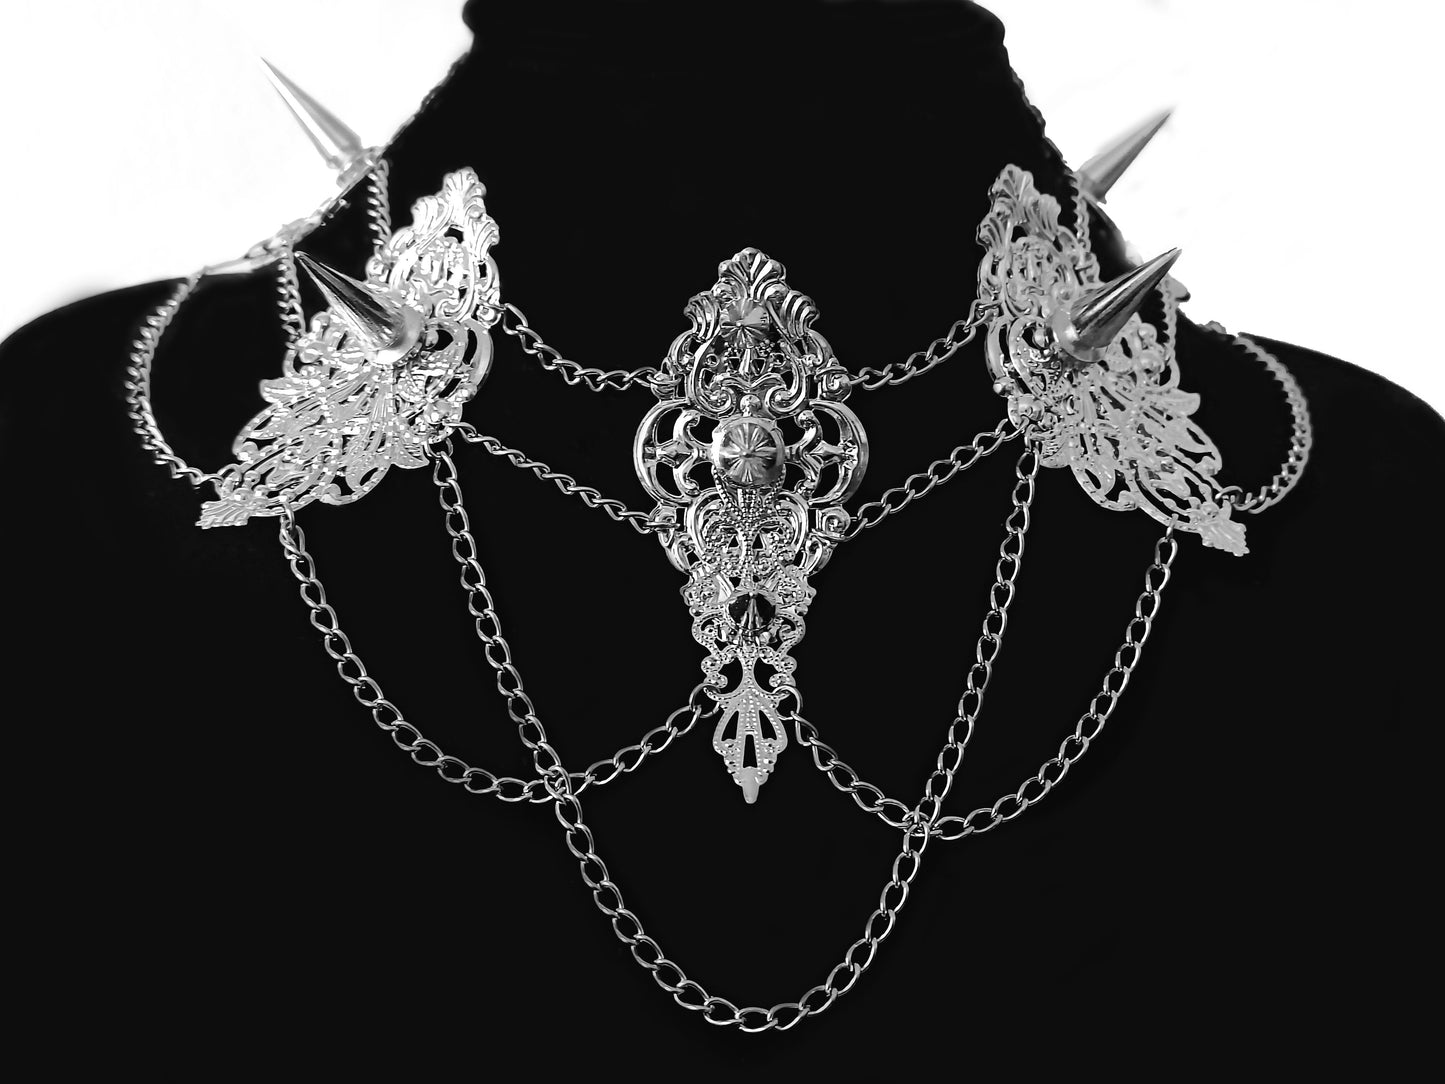 An elaborate Myril Jewels studded choker featuring intricate filigree work with sharp spikes, connected by multiple fine chains that create a lavish draped effect. This bold, gothic-chic necklace epitomizes dark-avantgarde style, ideal for enhancing festival, drag, or everyday witchcore attire.